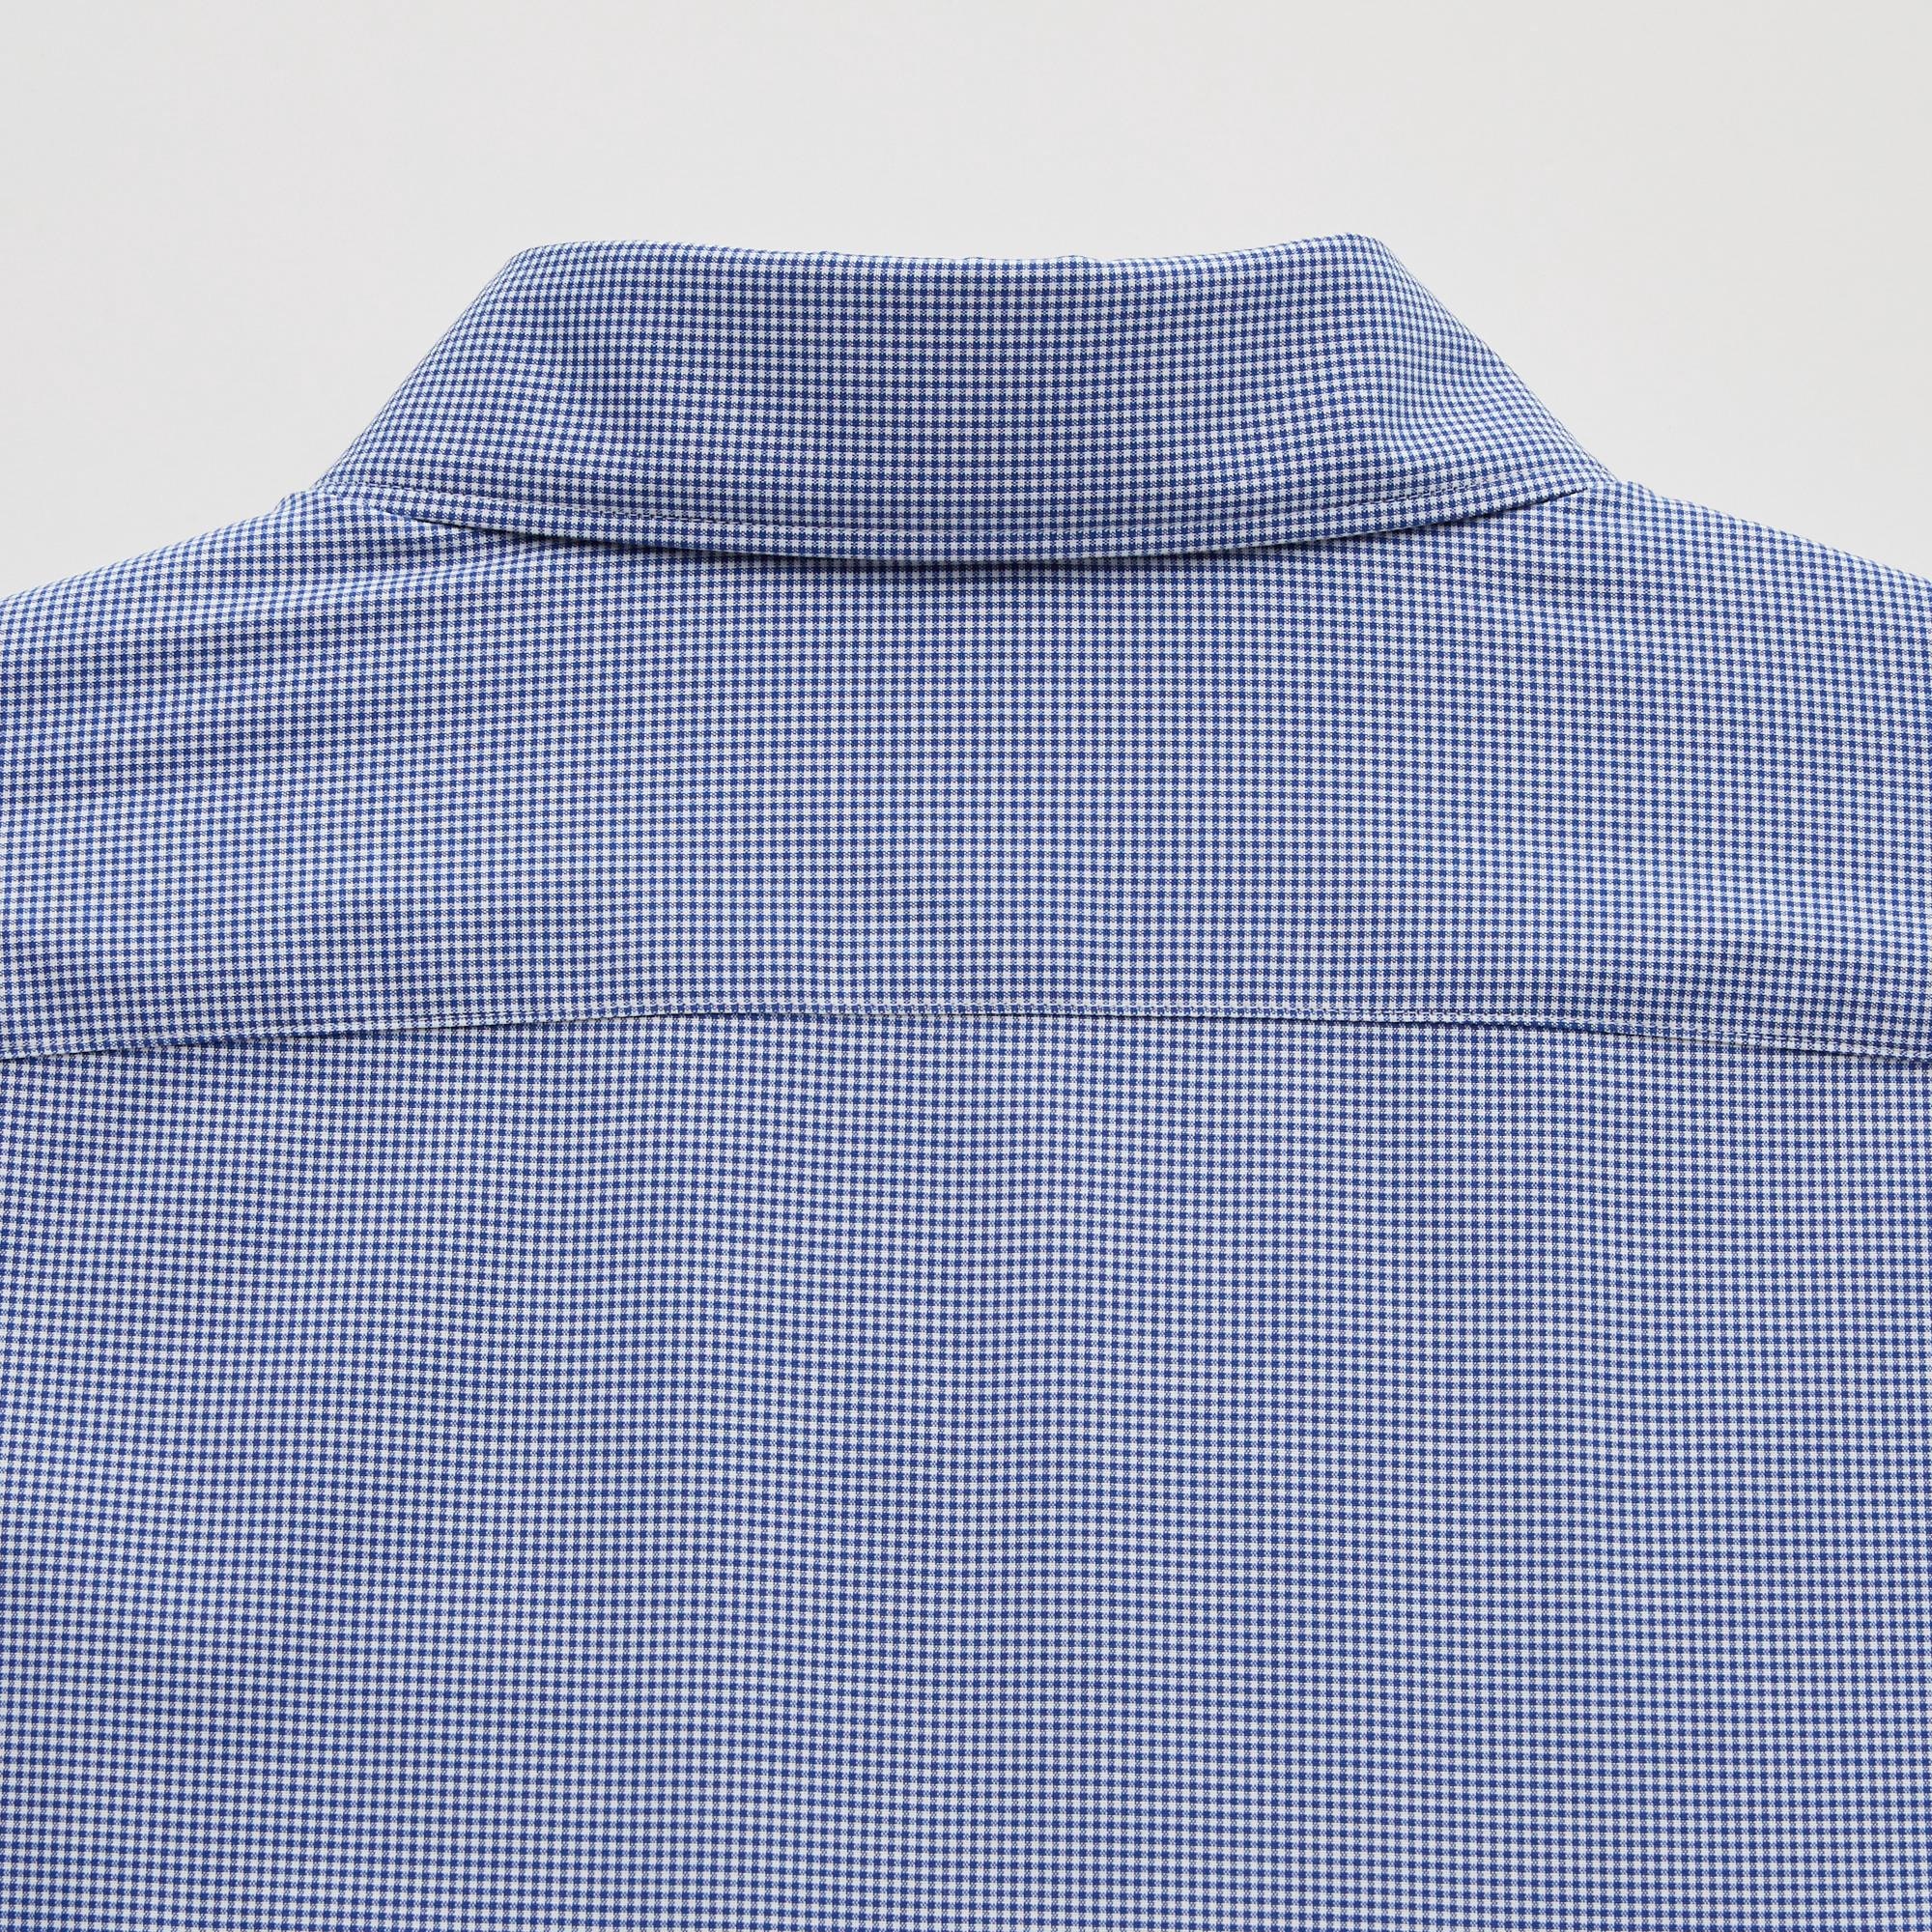 Easy Care Checked Stretch Slim-Fit Long-Sleeve Shirt